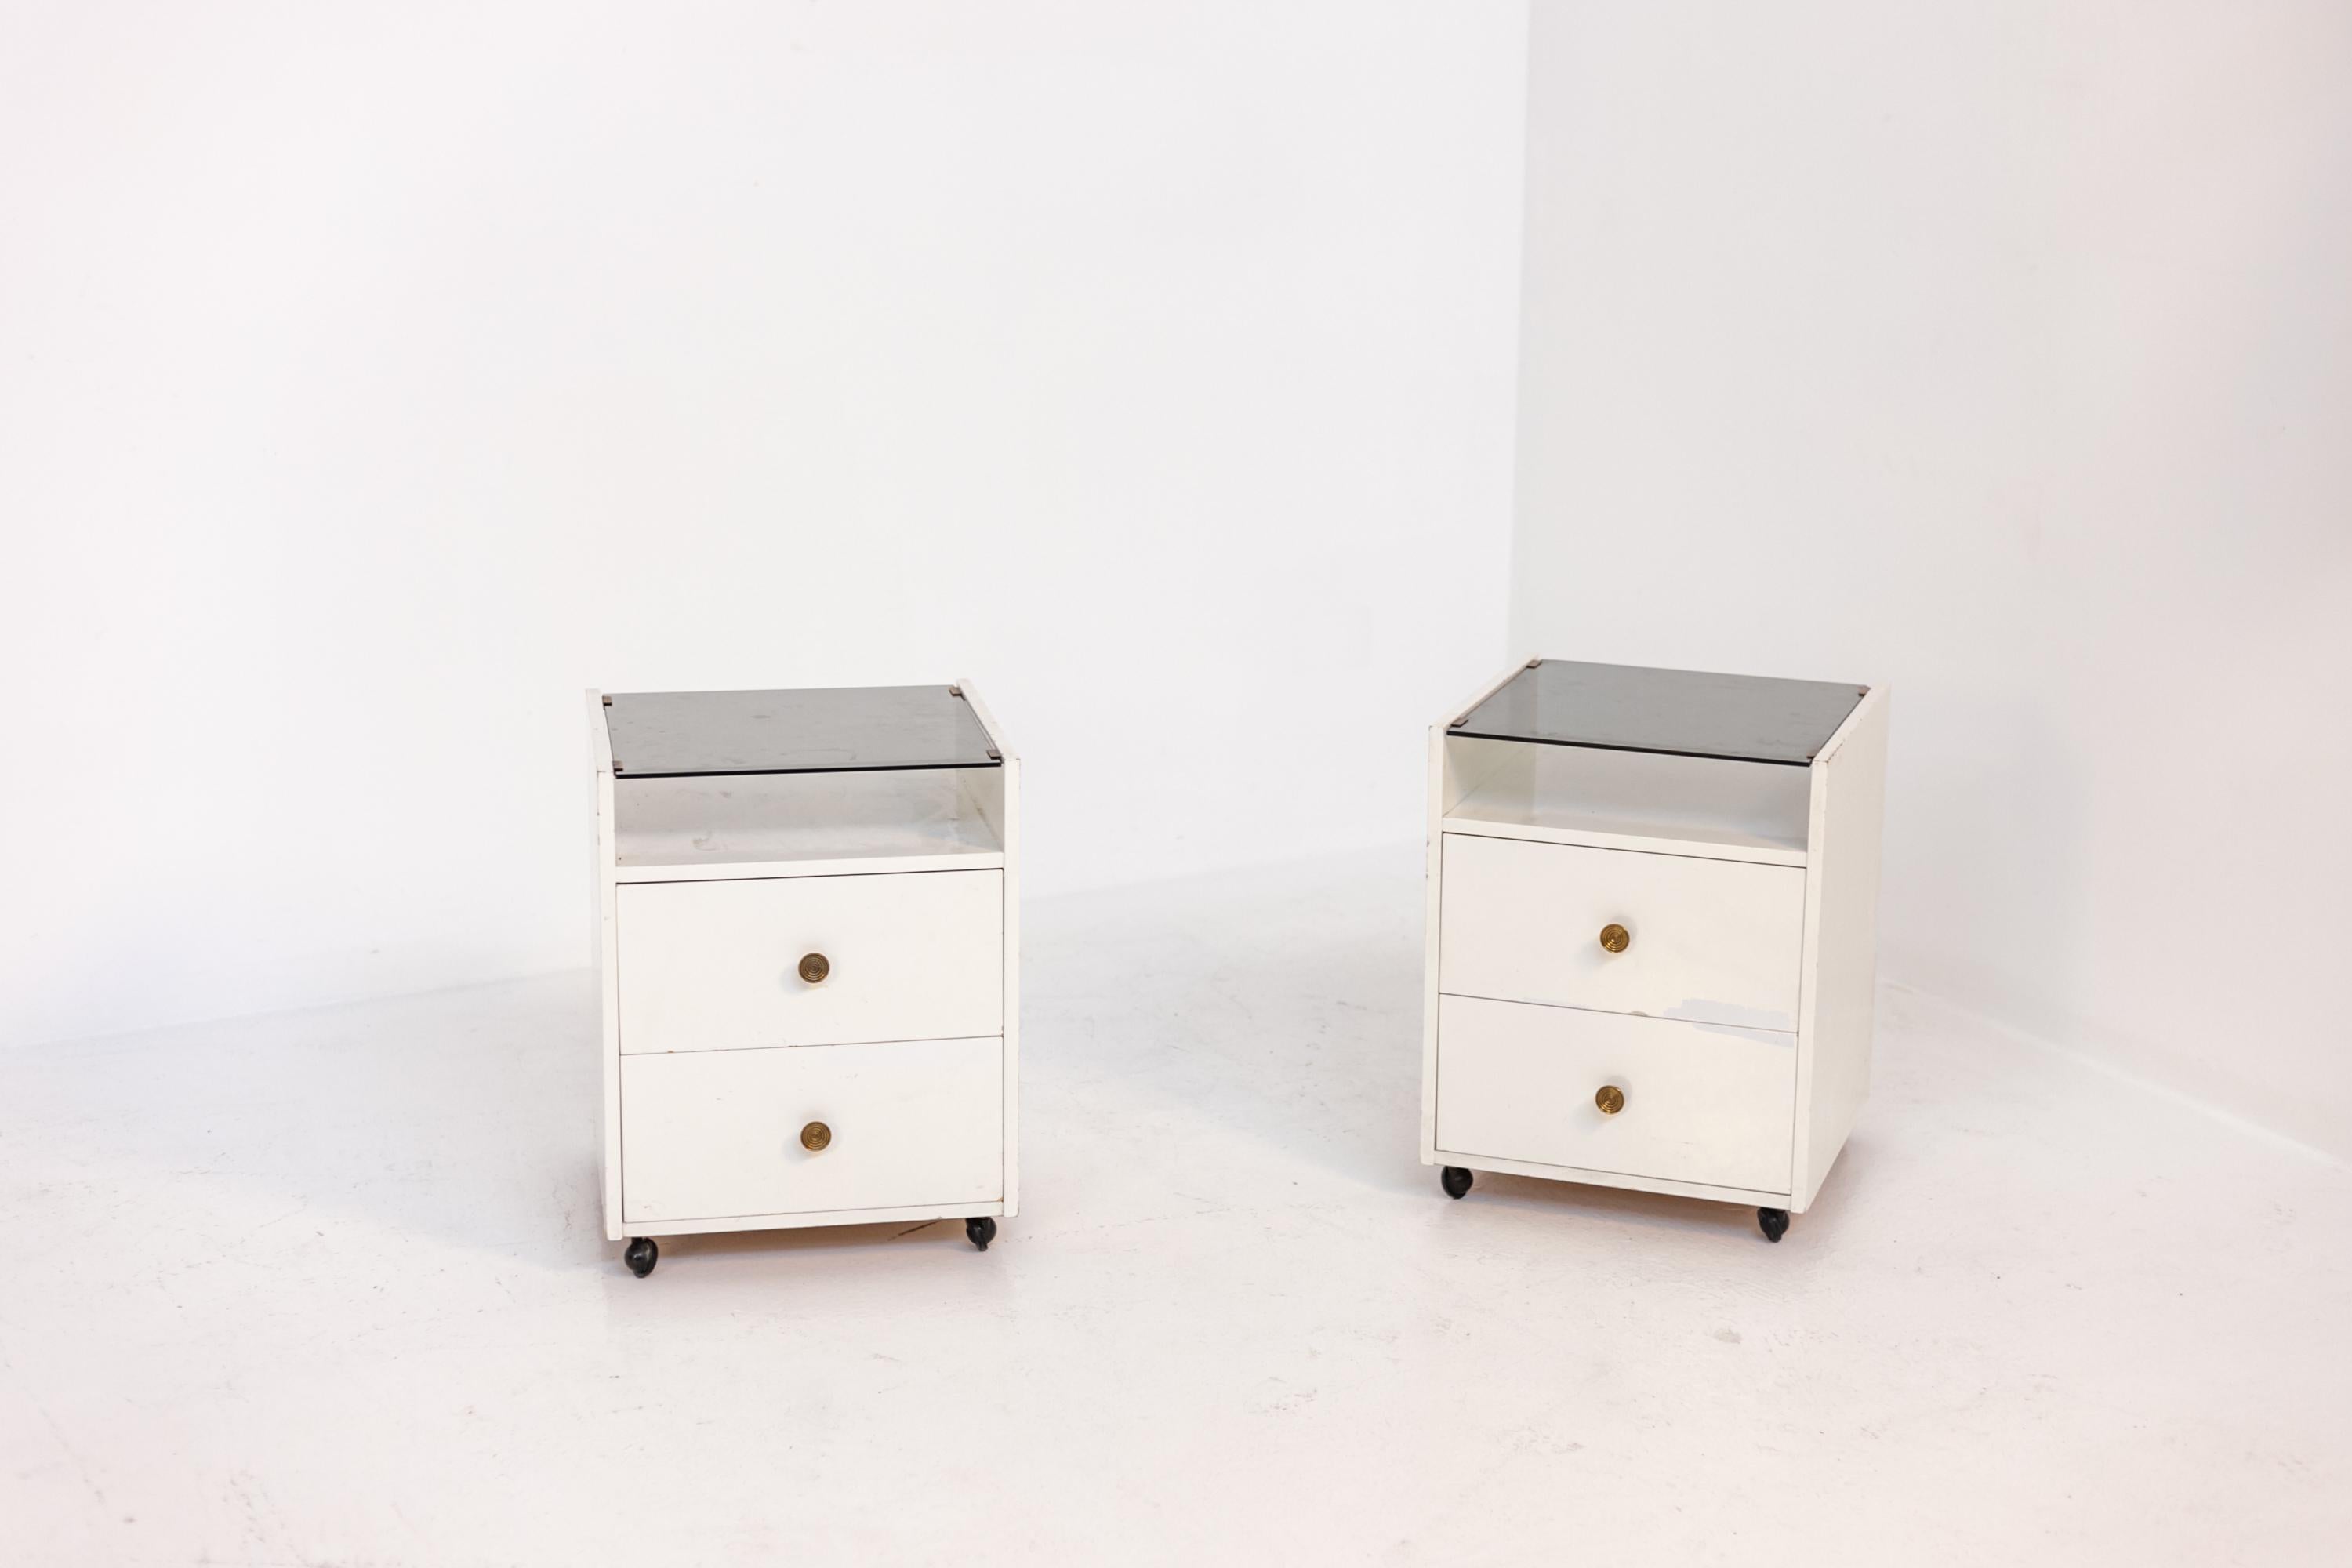 Elegant pair of Italian nightstands made by designer Carlo de Carli for the Sormani manufacture in the 1960s. The furniture is easily transportable via their four rolling feet. The nightstands are made with a white wood frame. The nightstands